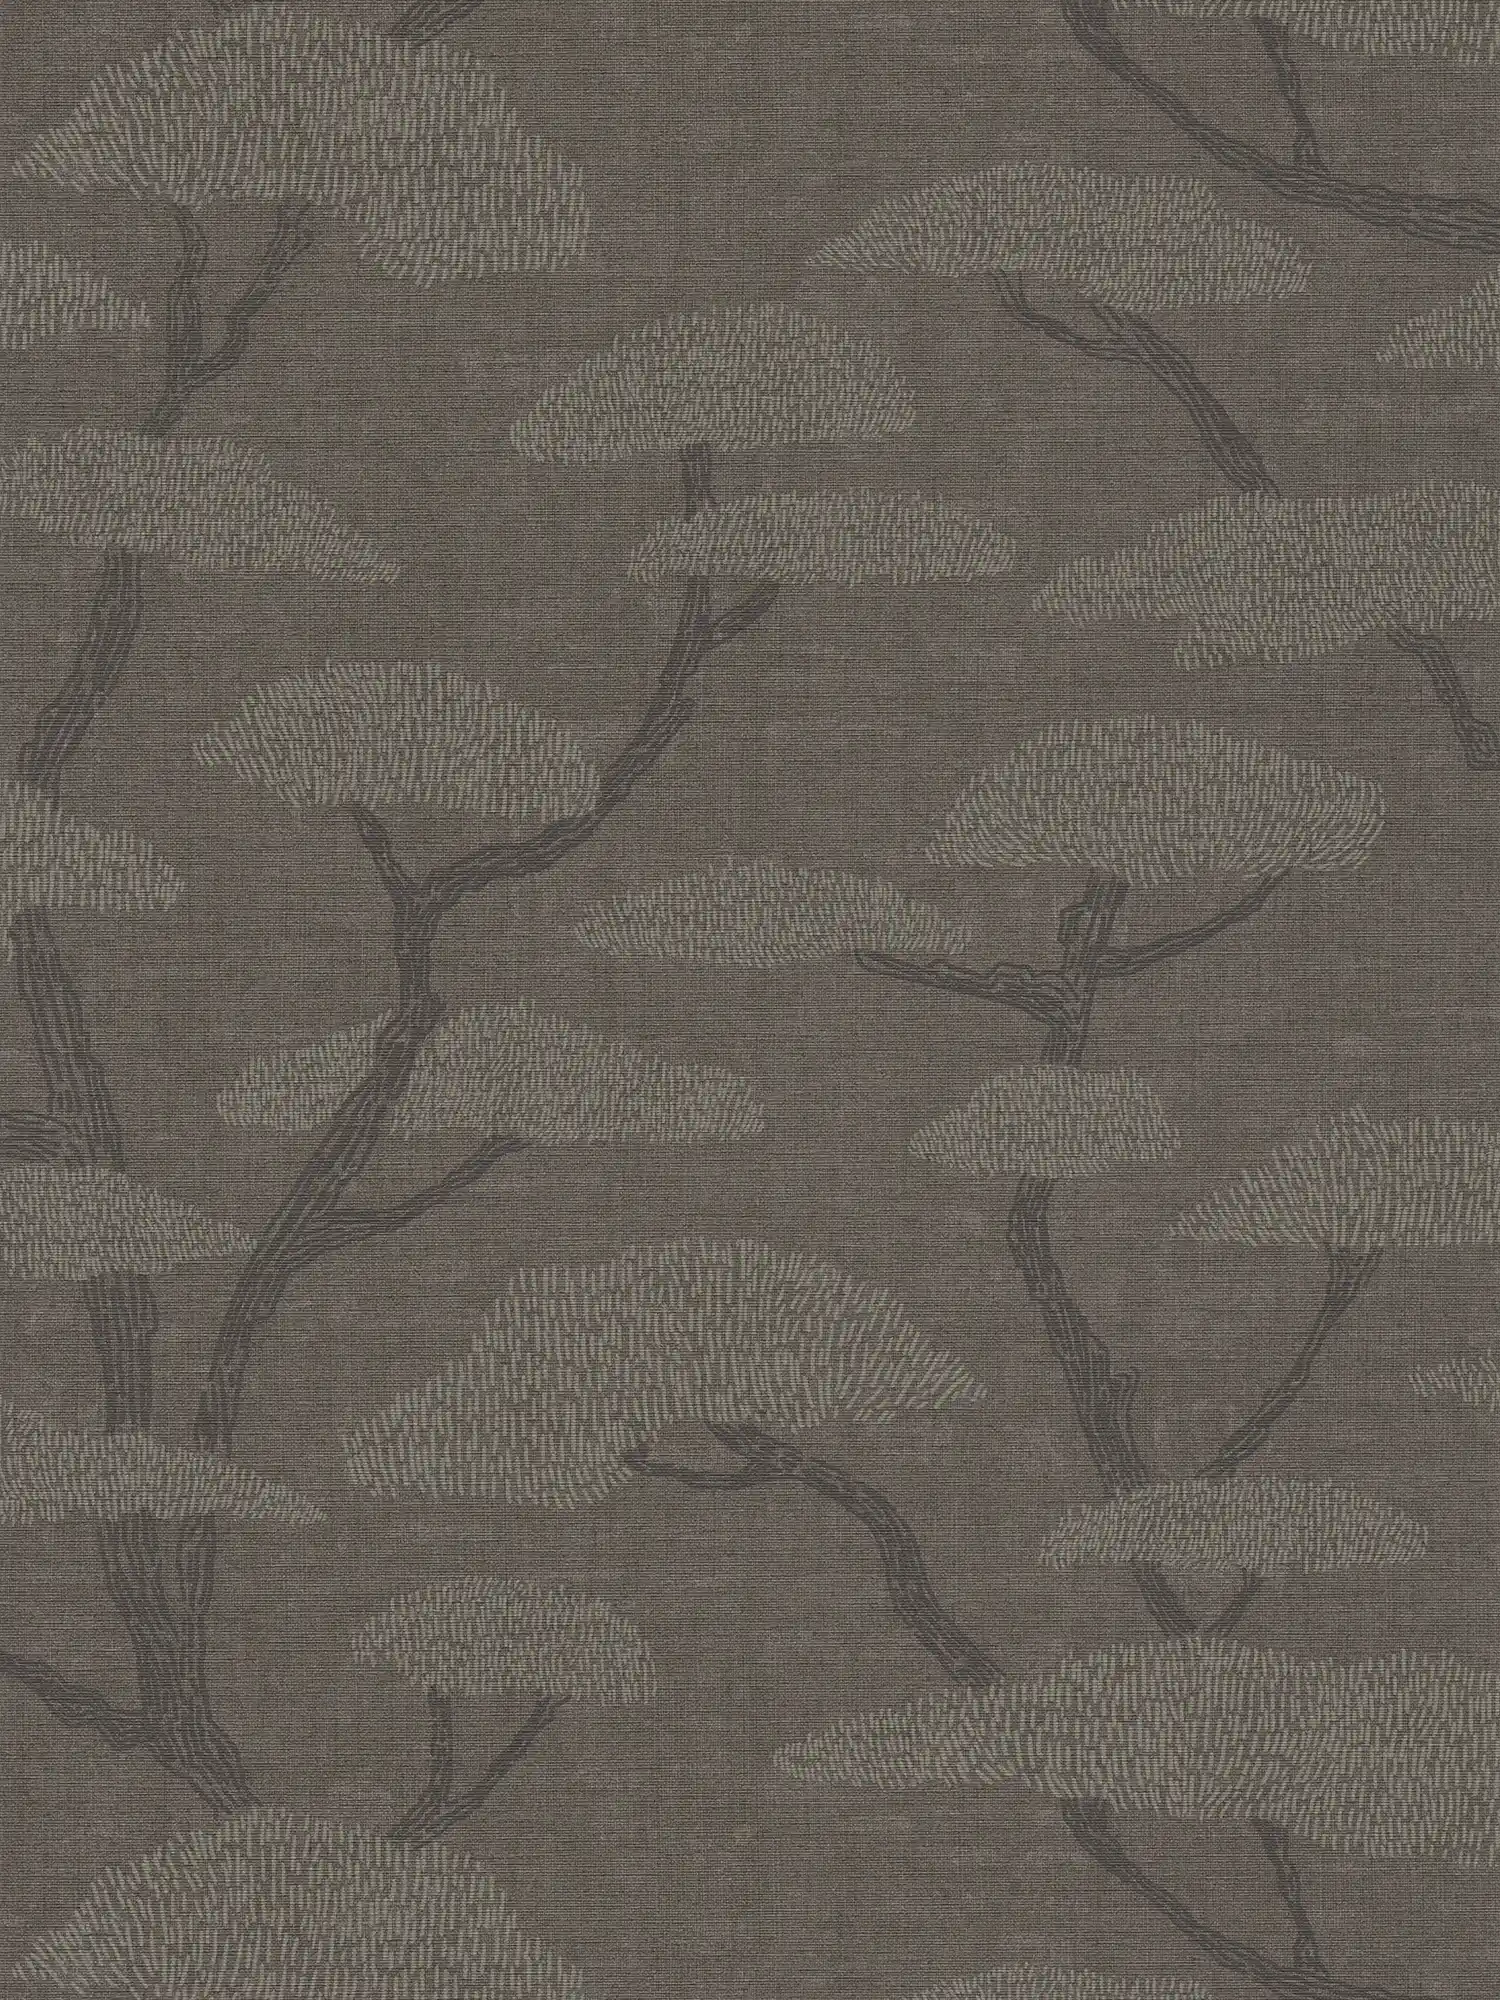 Anthracite wallpaper with tree motif in vintage style
